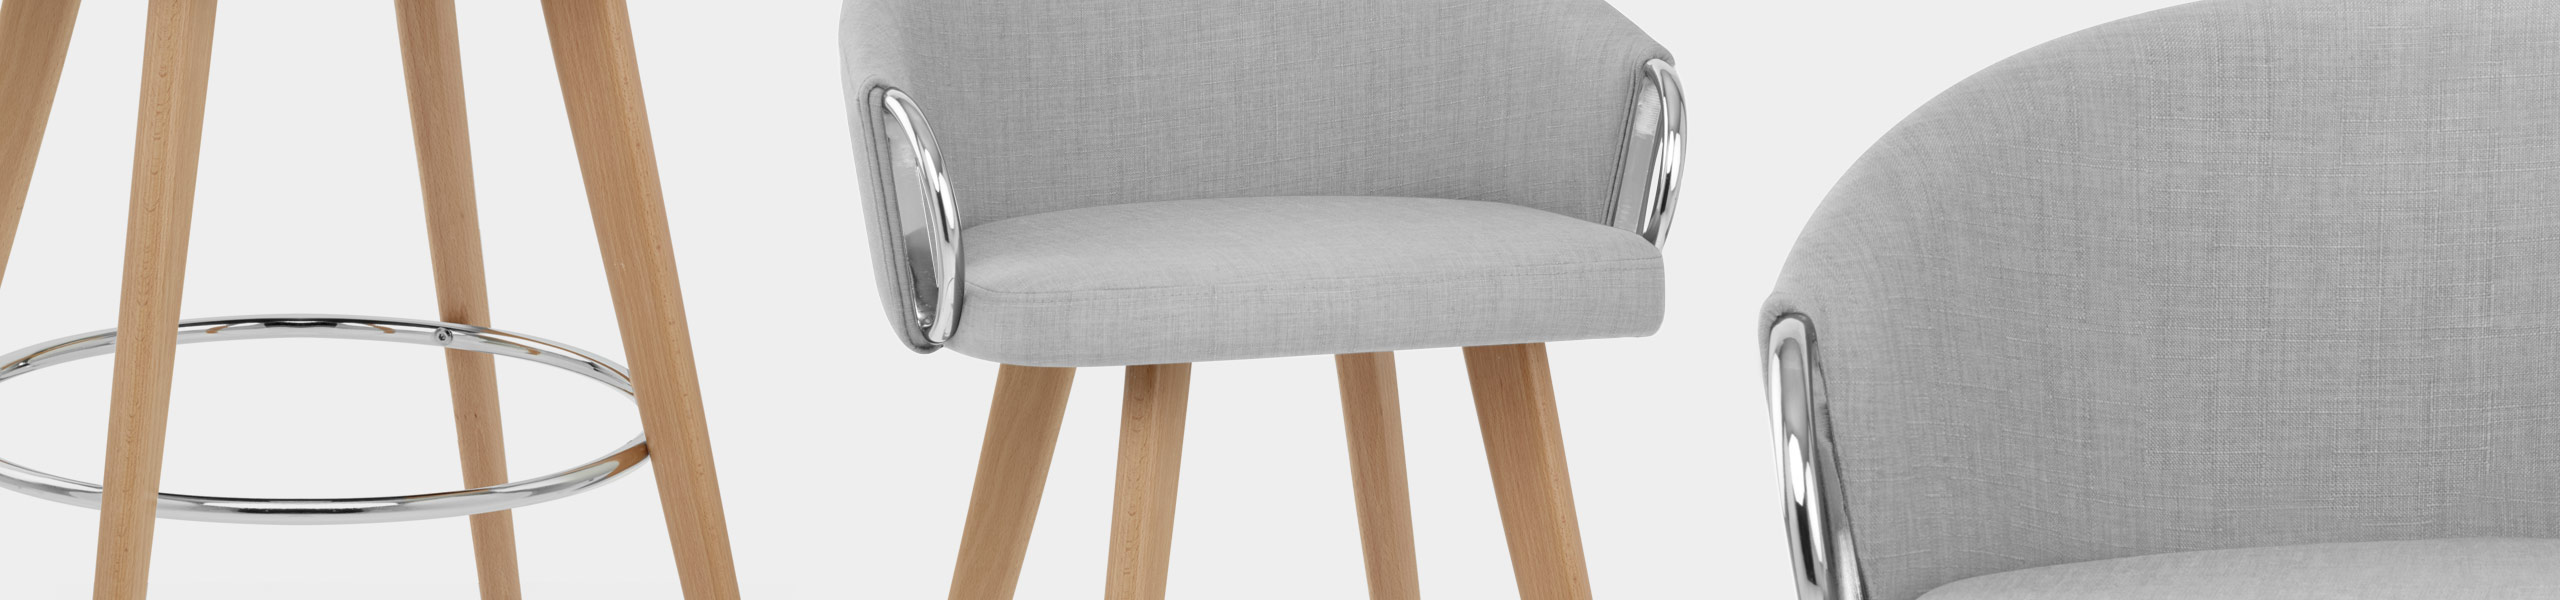 Neo Wooden Stool Grey Fabric Video Banner